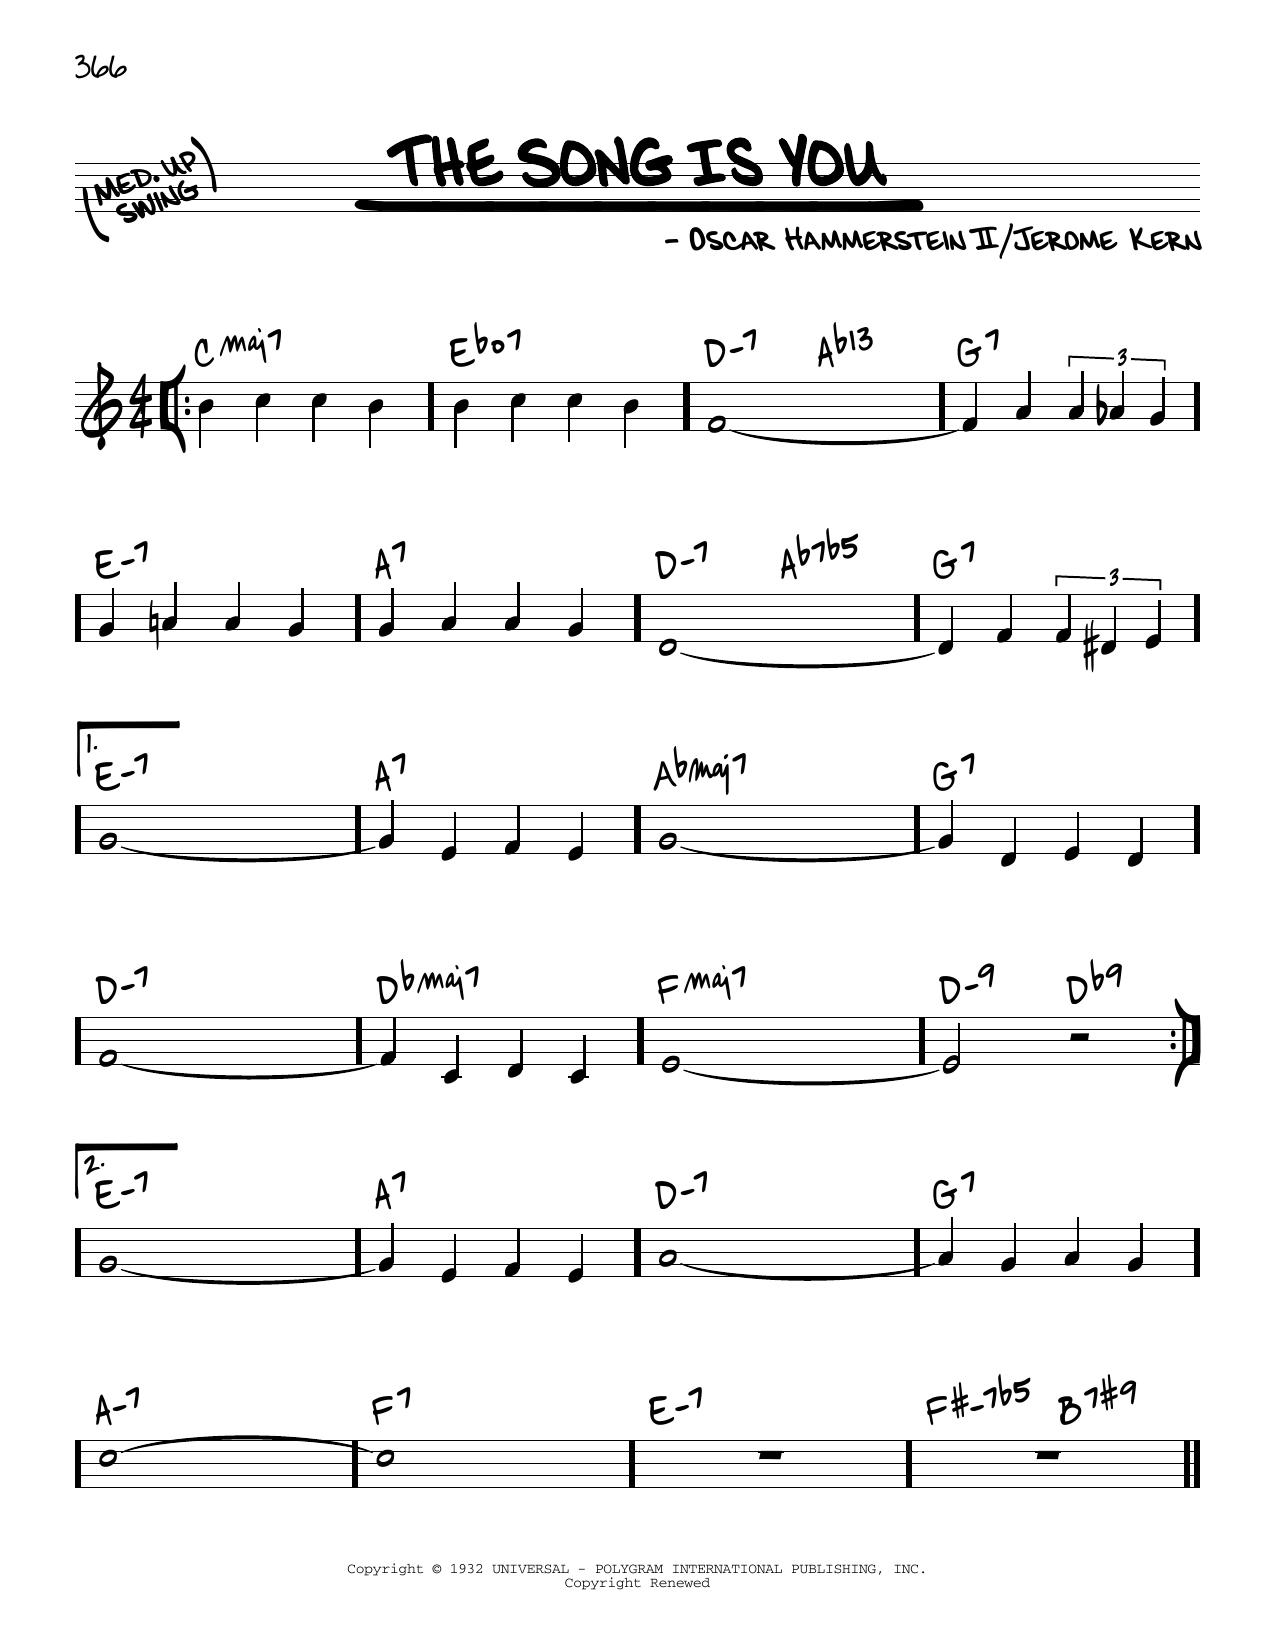 Download Jerome Kern and Oscar Hammerstein II The Song Is You [Reharmonized version] Sheet Music